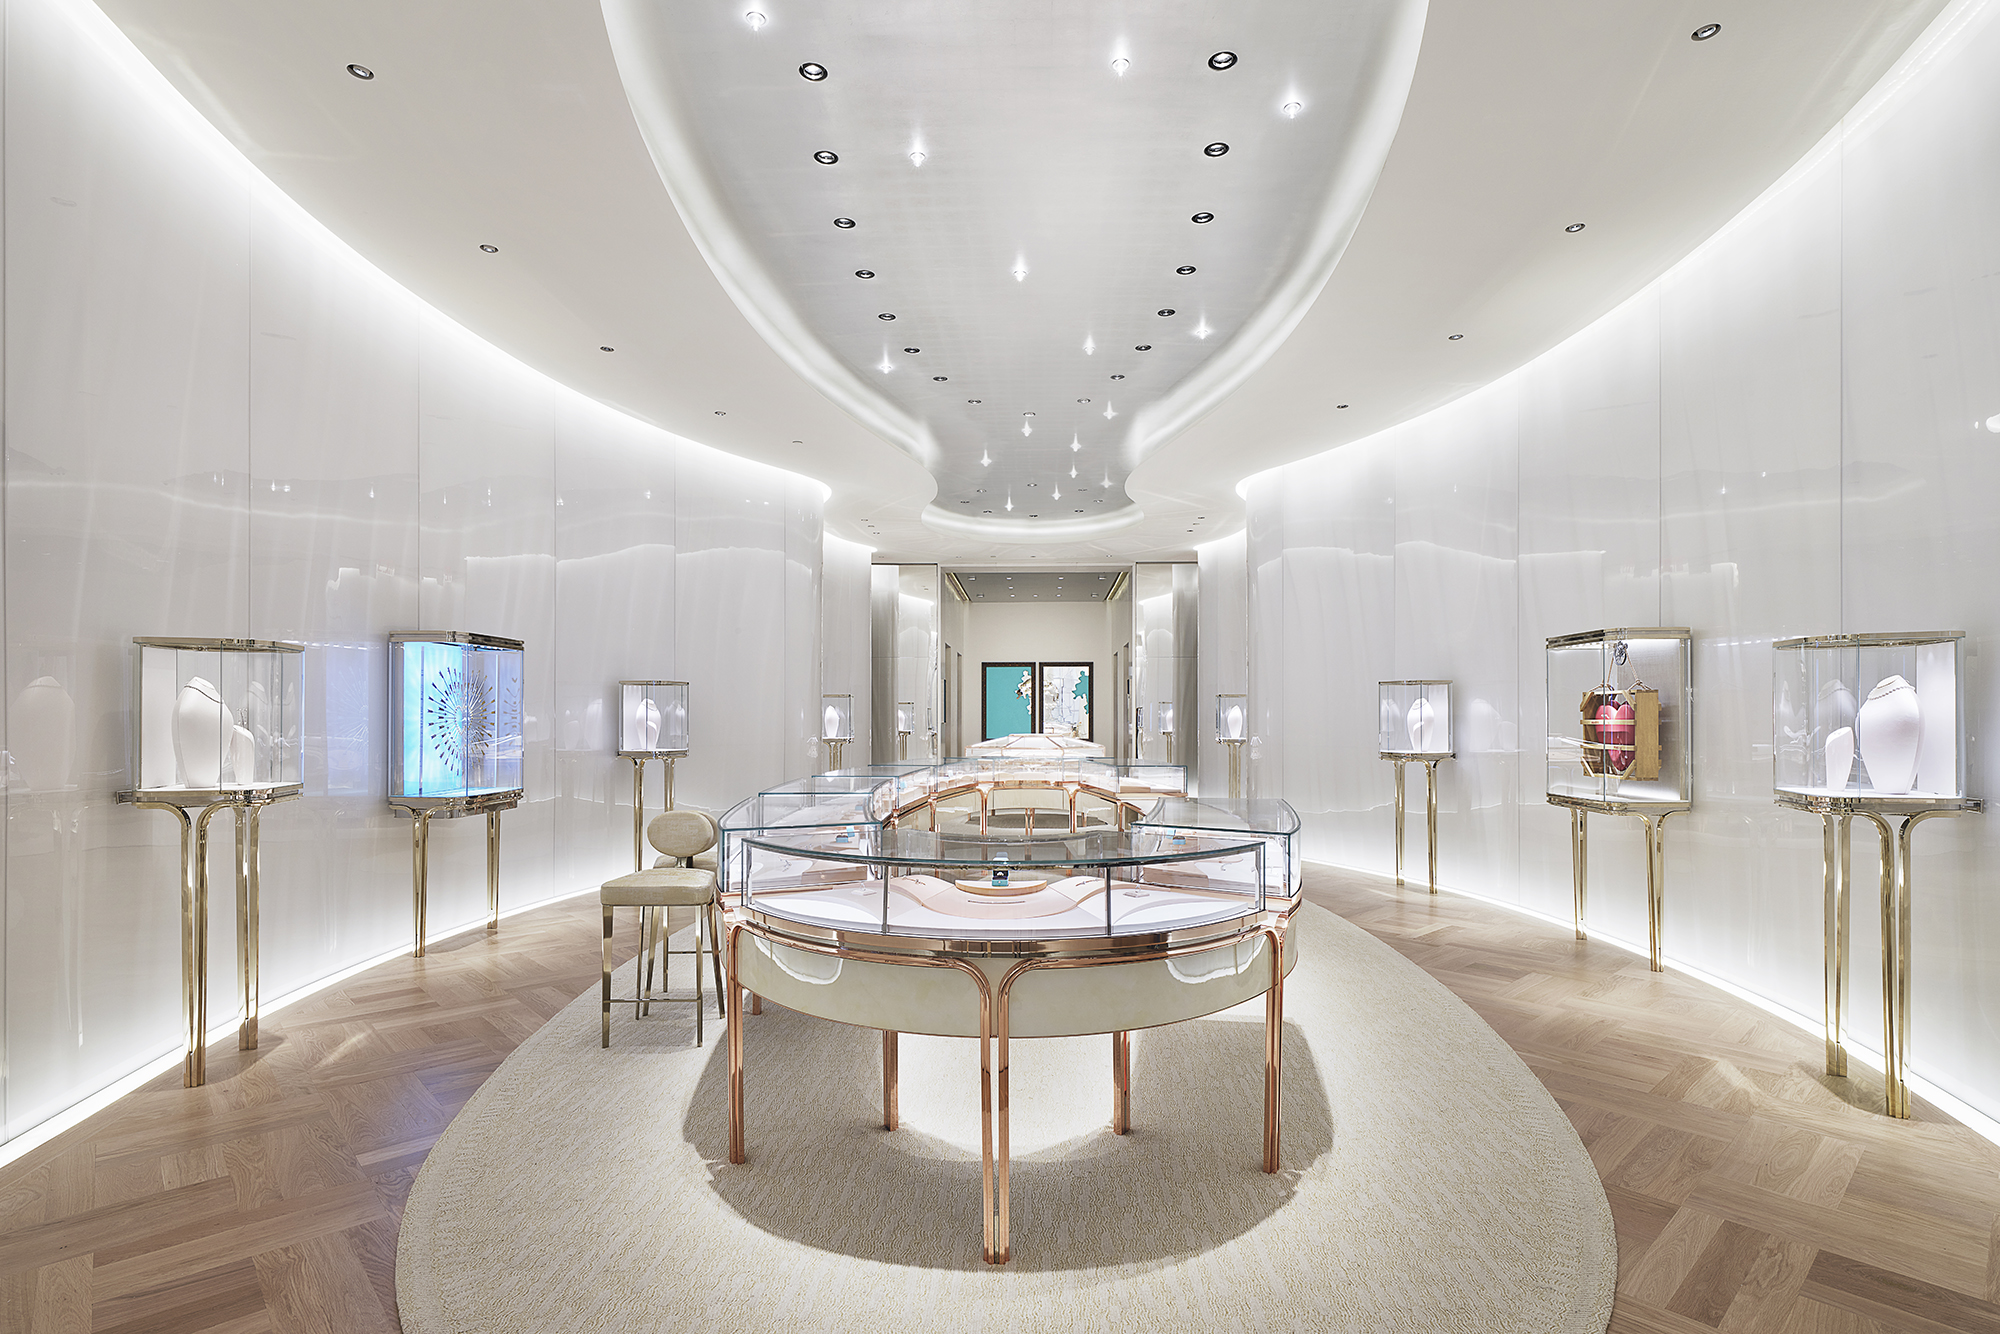 Tiffany & Co. The Landmark interior lit by white light with white table and display cases